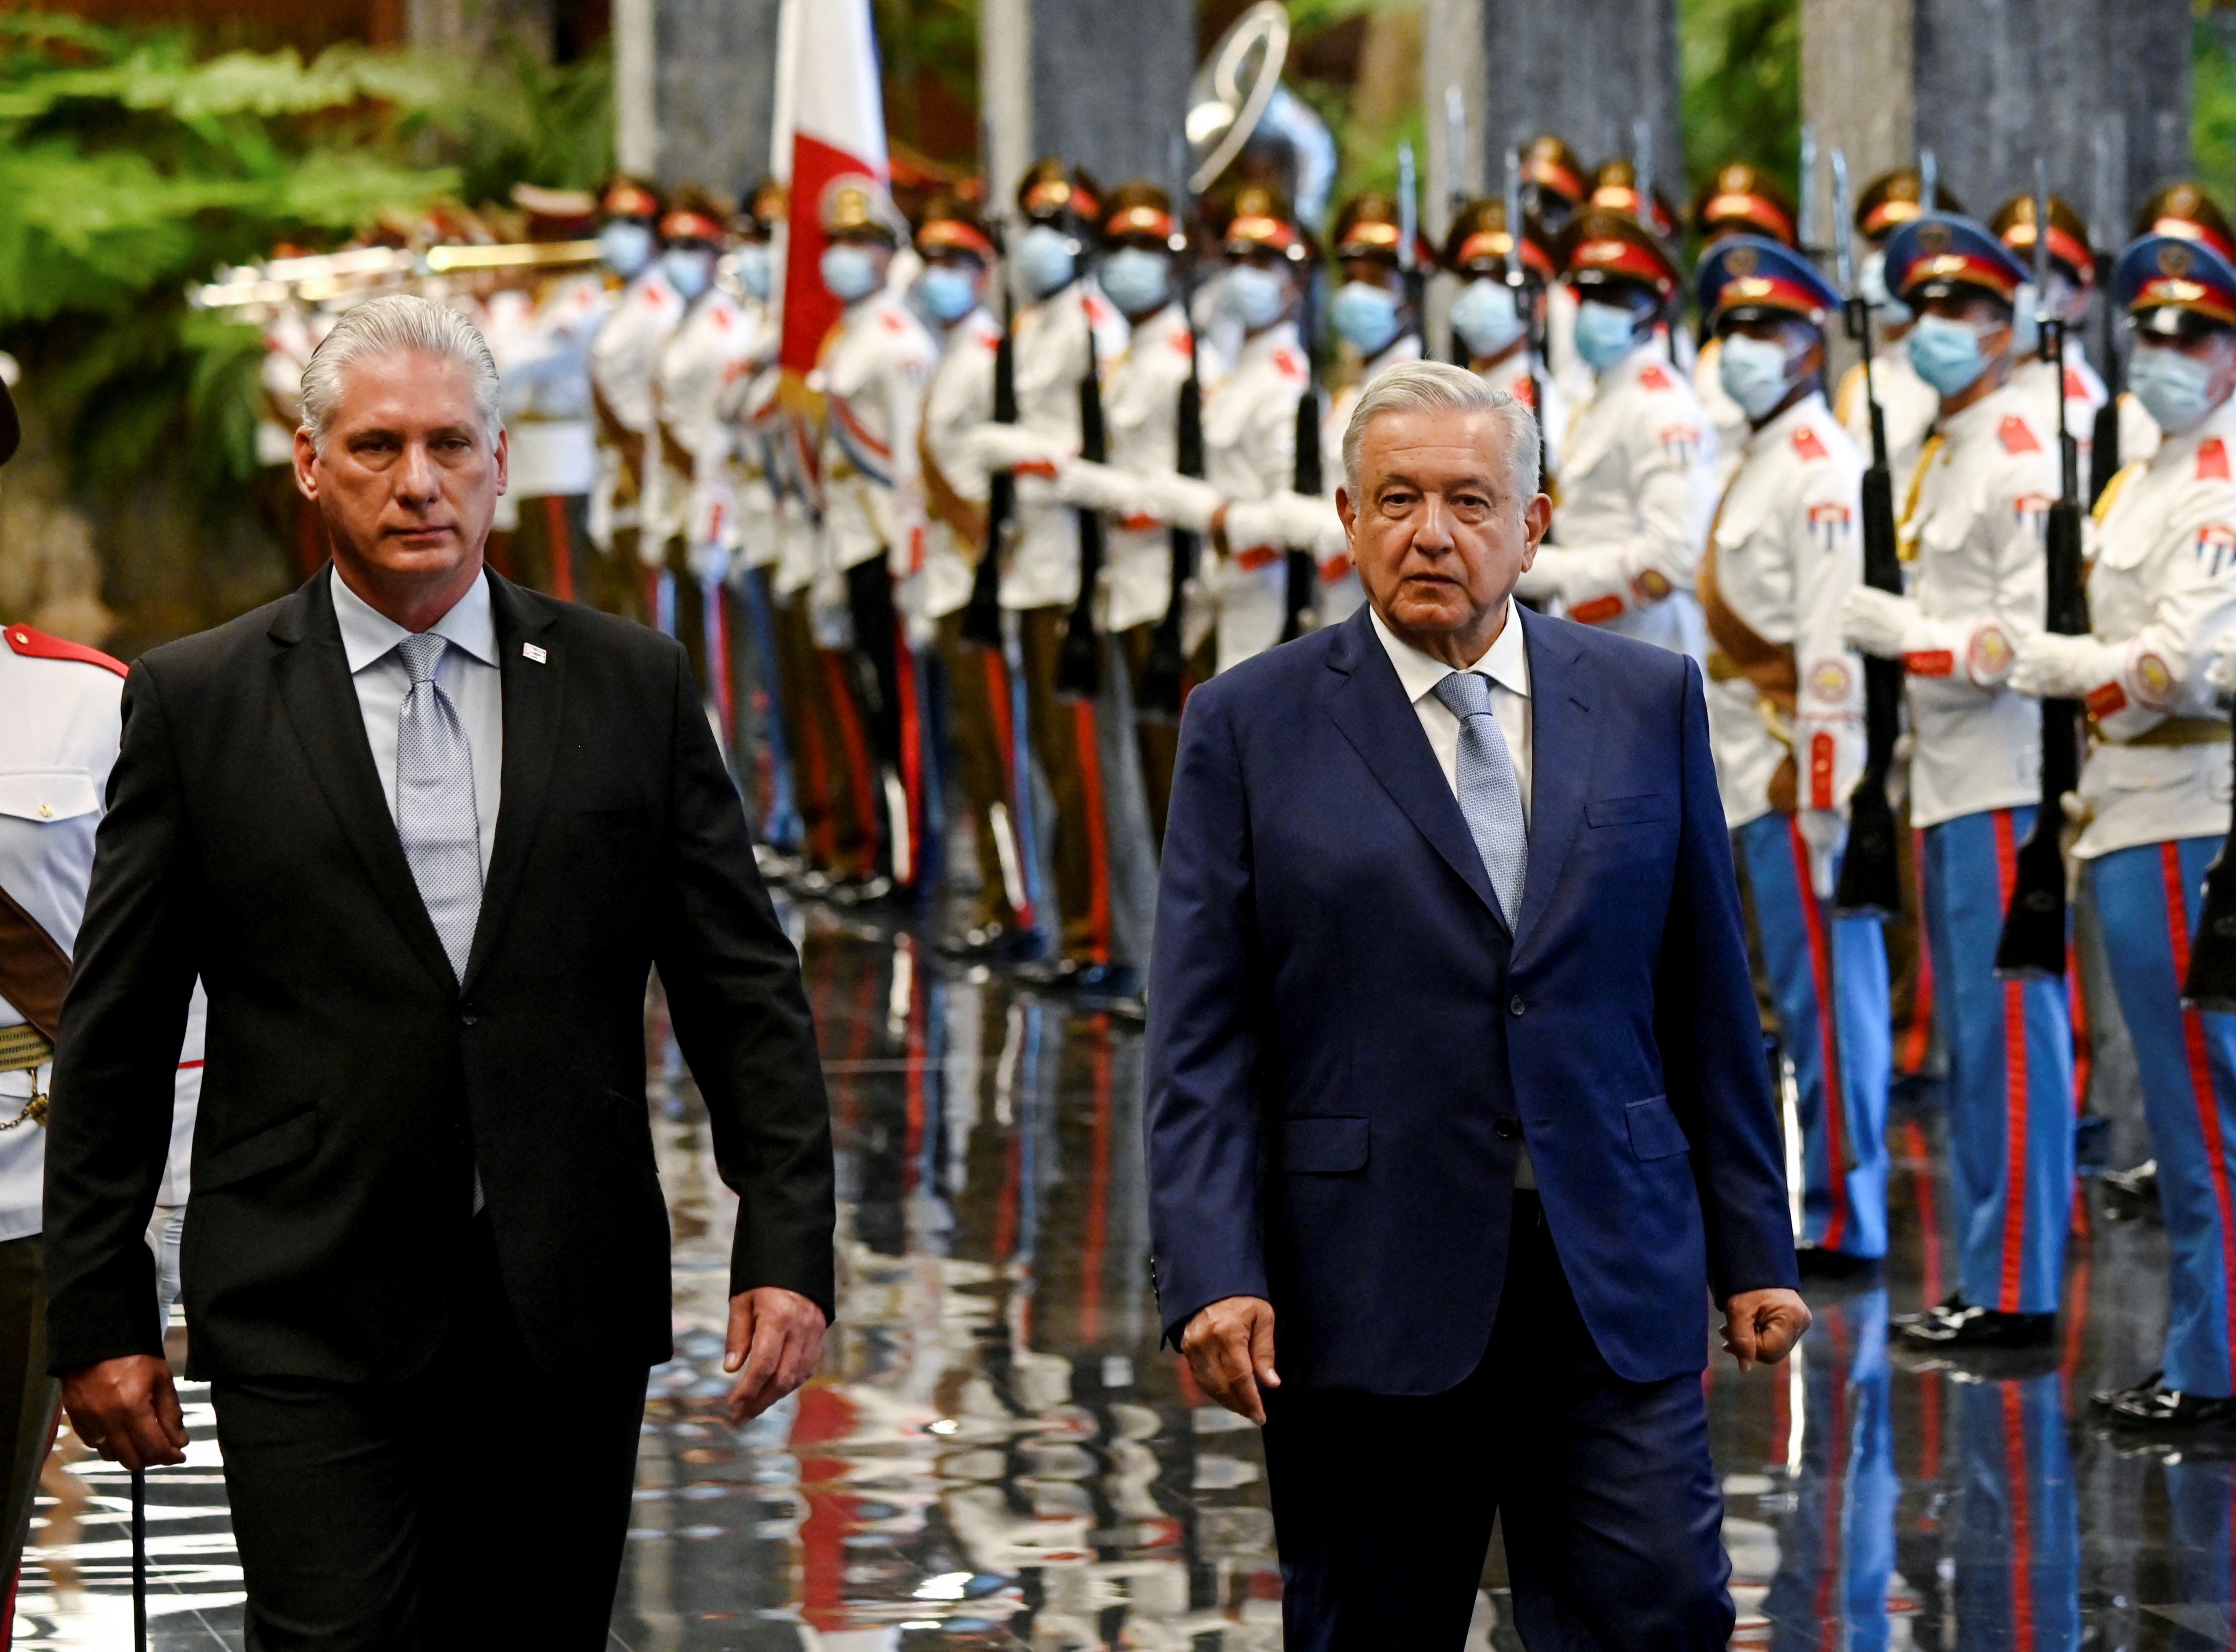 Cuba's President Miguel Diaz-Canel and Mexico's President Andres Manuel Lopez Obrador walk at the Revolution Palace, during Lopez's visit to Cuba, in Havana, Cuba May 8, 2022. Yamil Lage/Pool via REUTERS